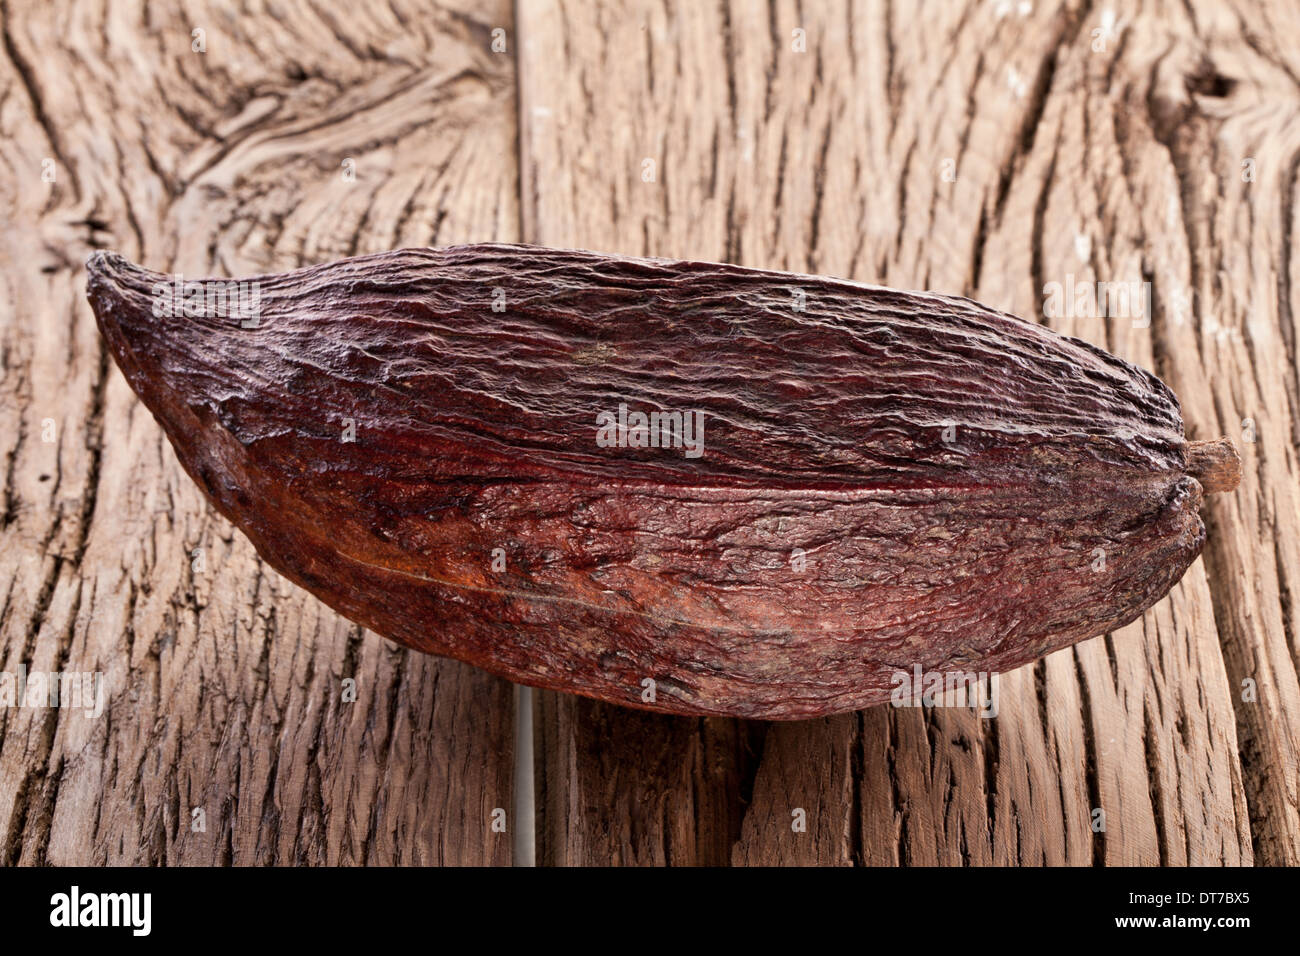 Cocoa pods on a wooden table. Stock Photo